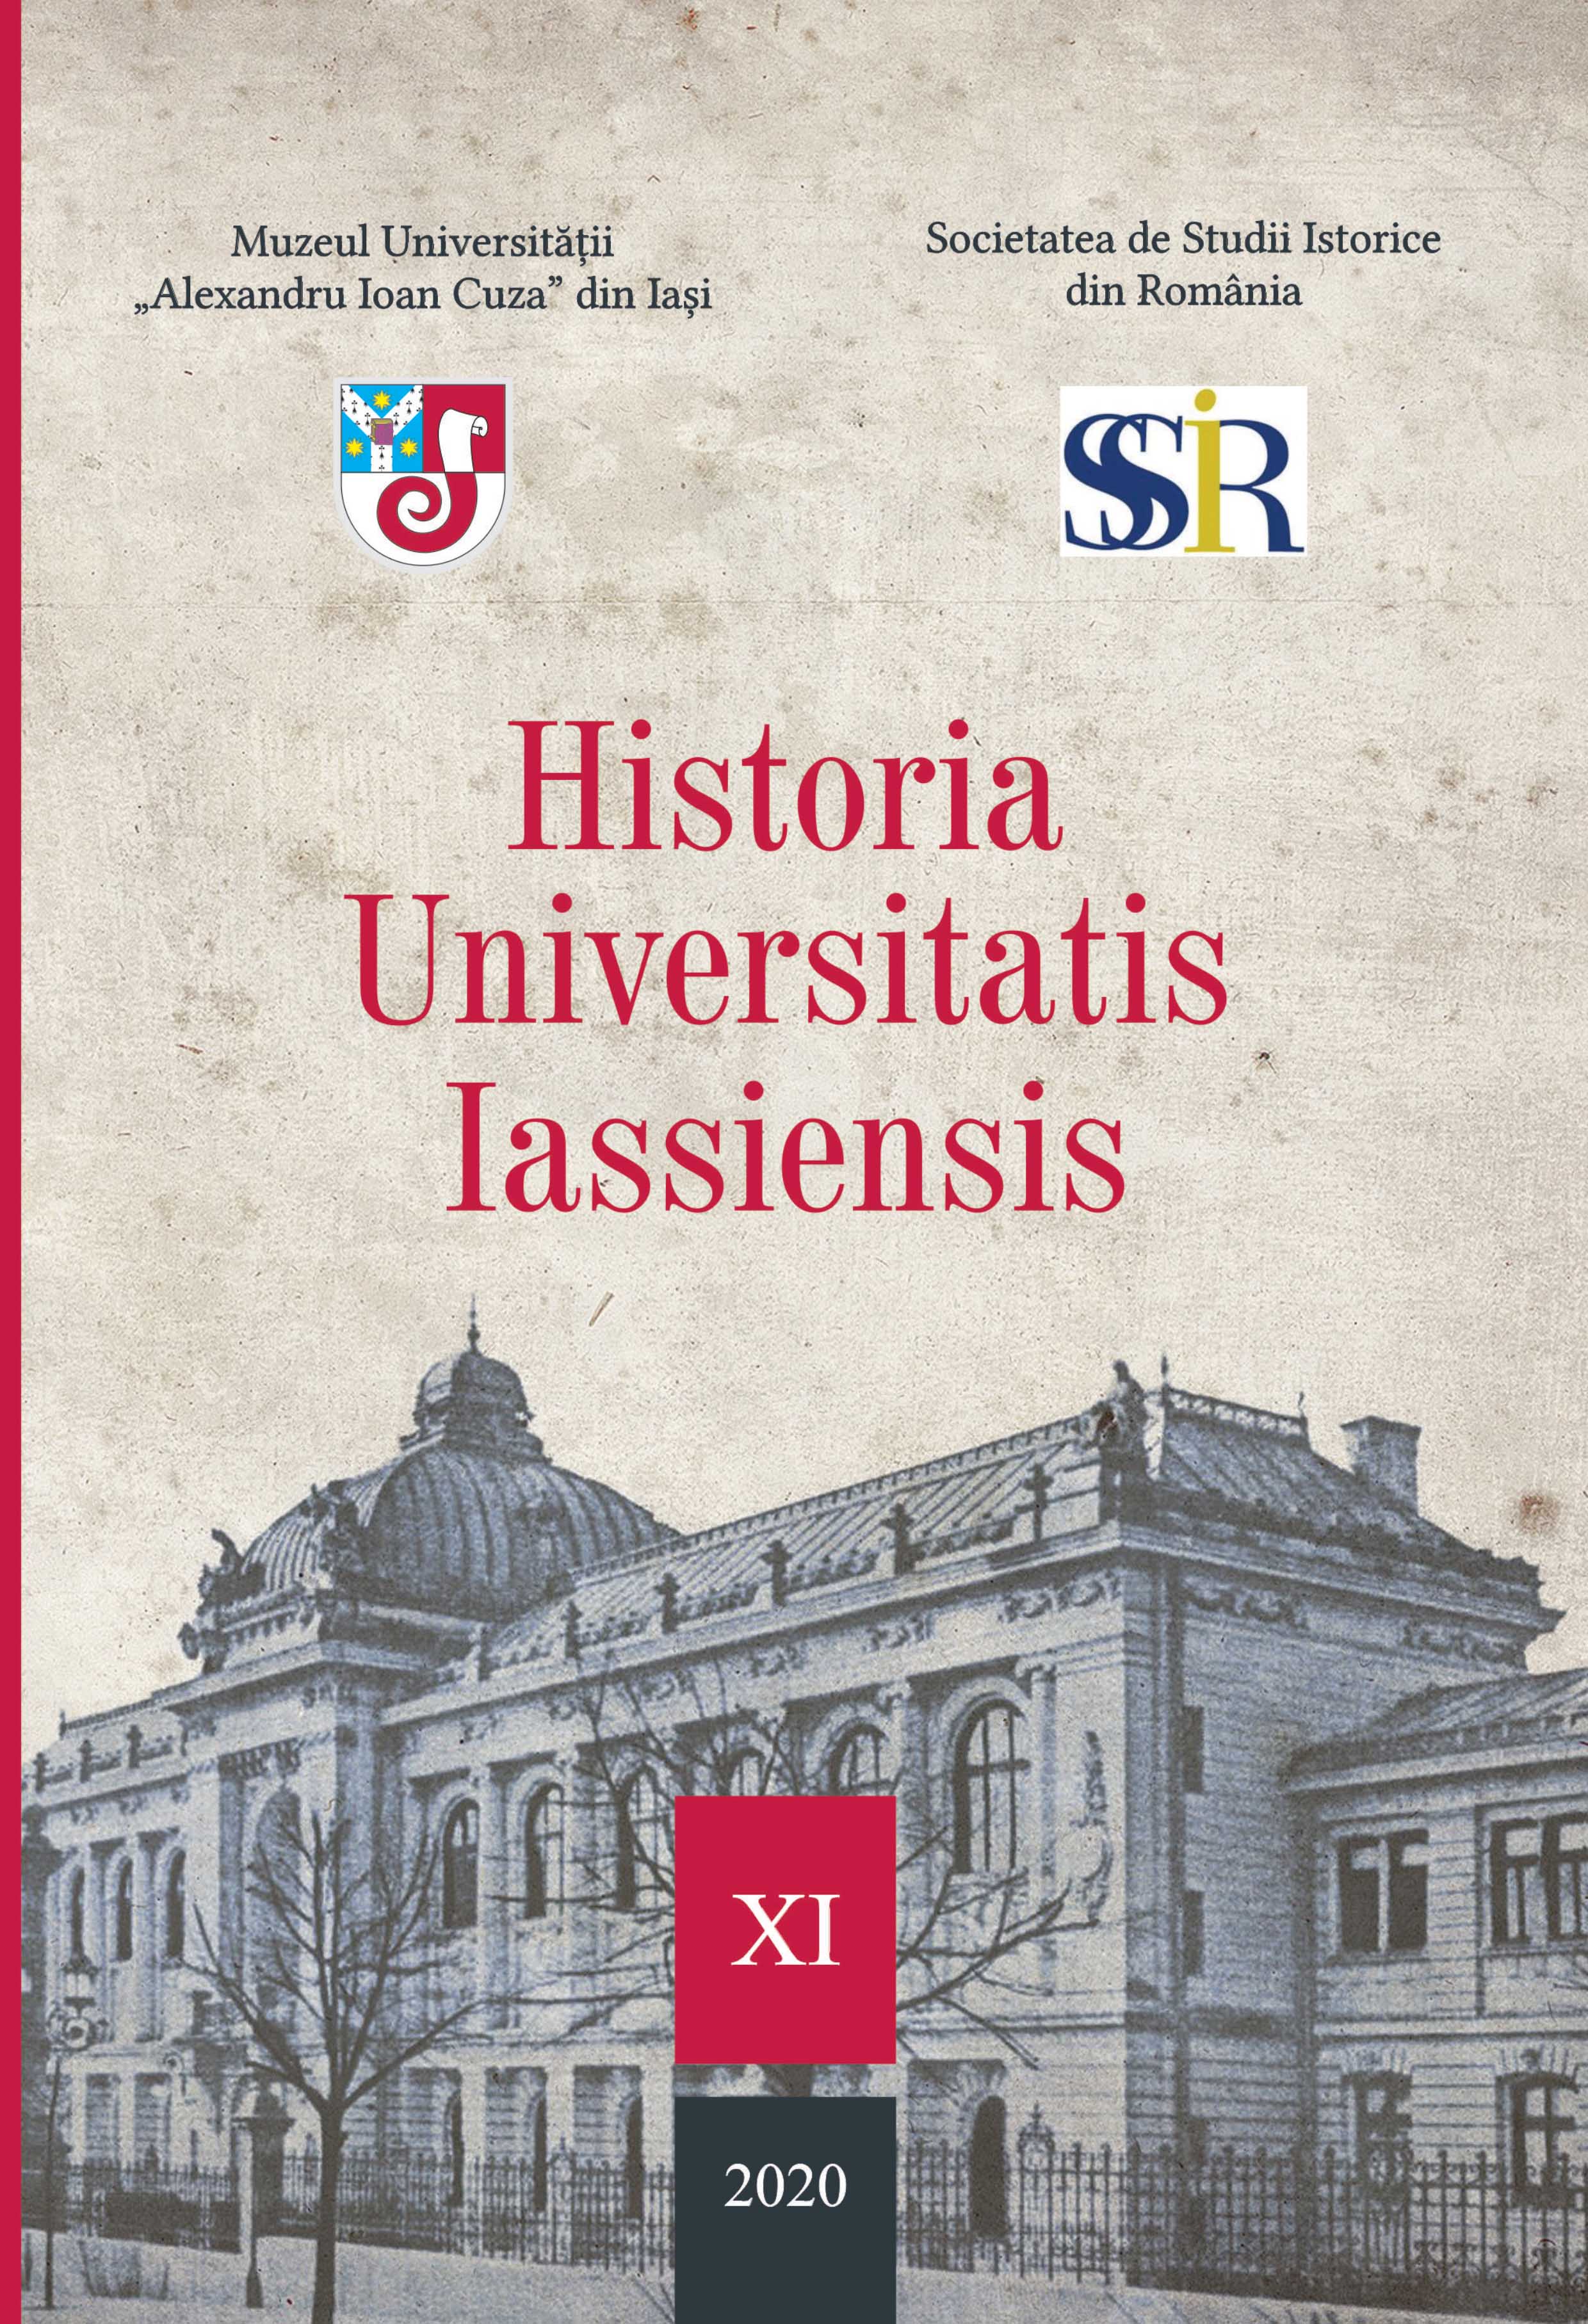 The Library of “The Museum of the City of Iași” Society and the Prehistory of the “Gh. Asachi” County Library Cover Image